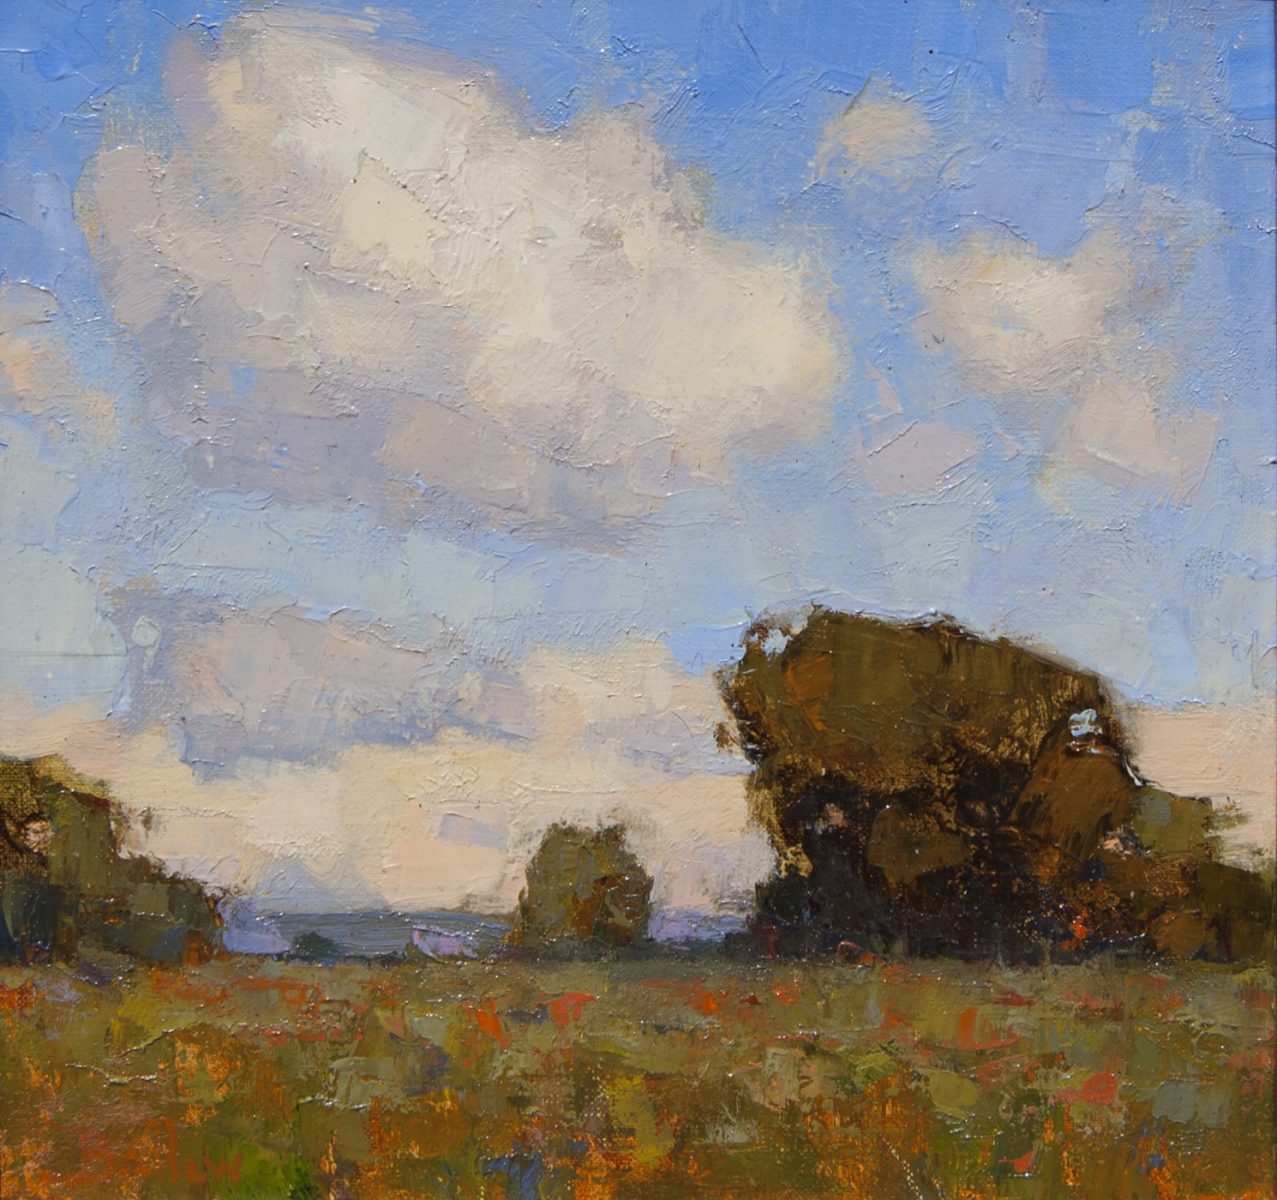 Summer Pastures painting by David Ballew